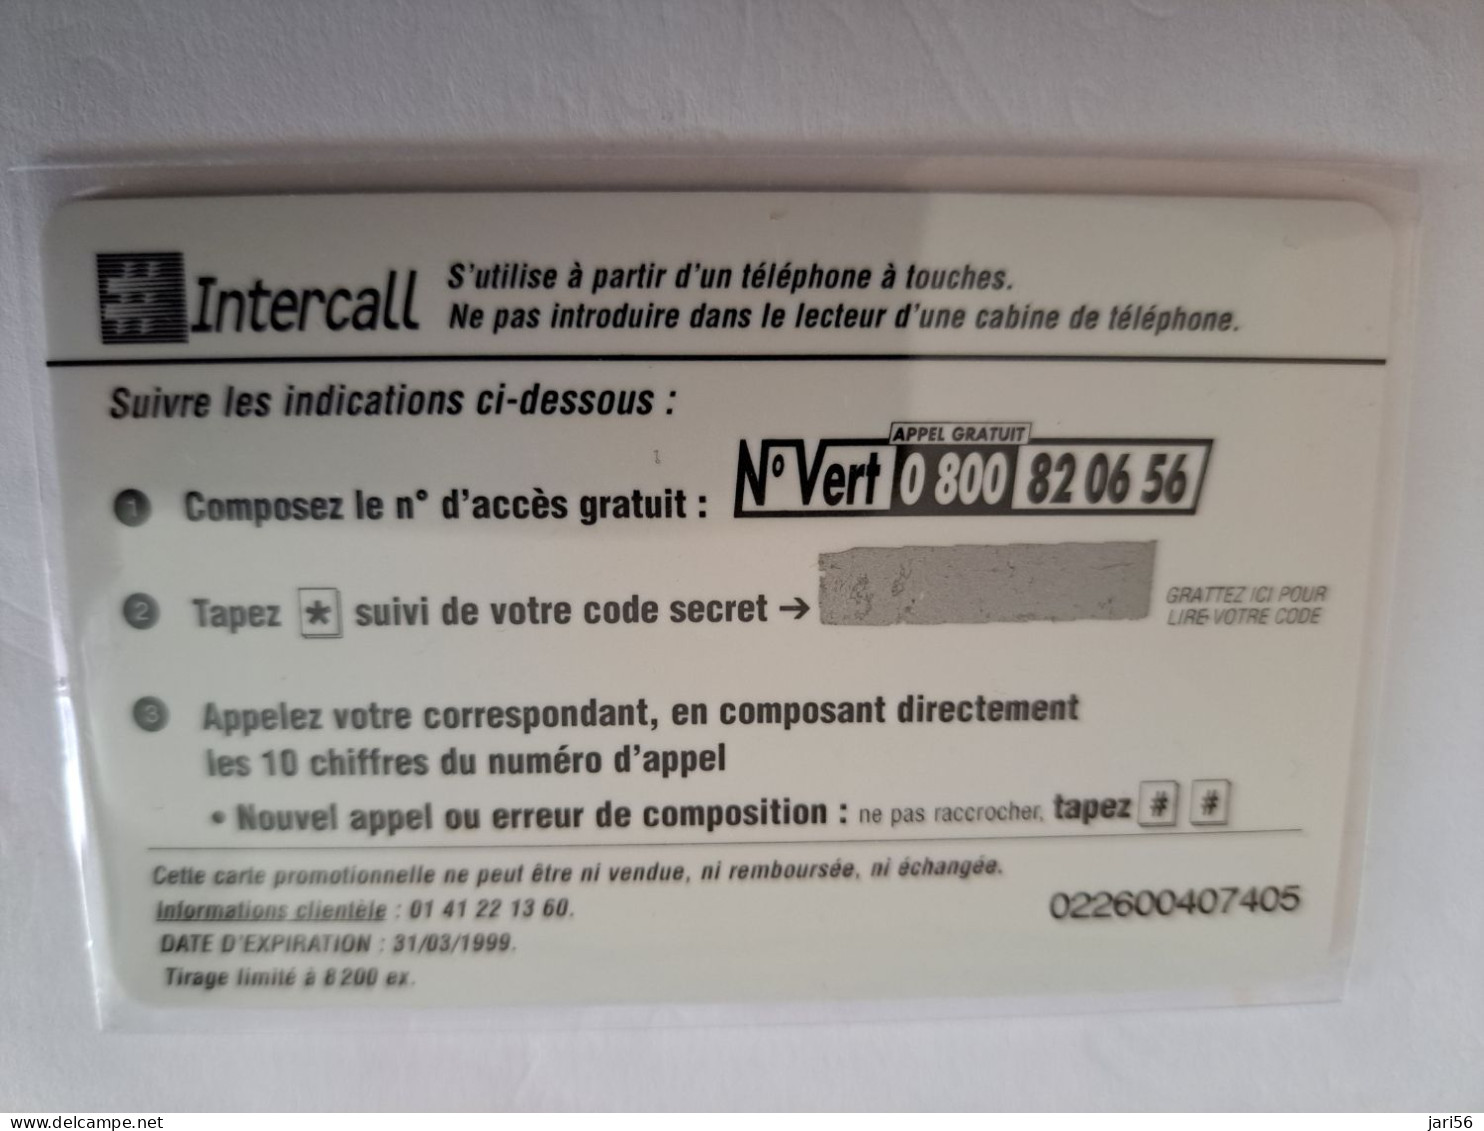 FRANCE/  /PREPAID  /INTERCALL/ LUCKY LUKE/ HORSE JOLLY/ 3M SYSTE / 15 UNITS/ TIRAGE 8200 EX!!  / MINT CARD    ** 15016** - Mobicartes (GSM/SIM)